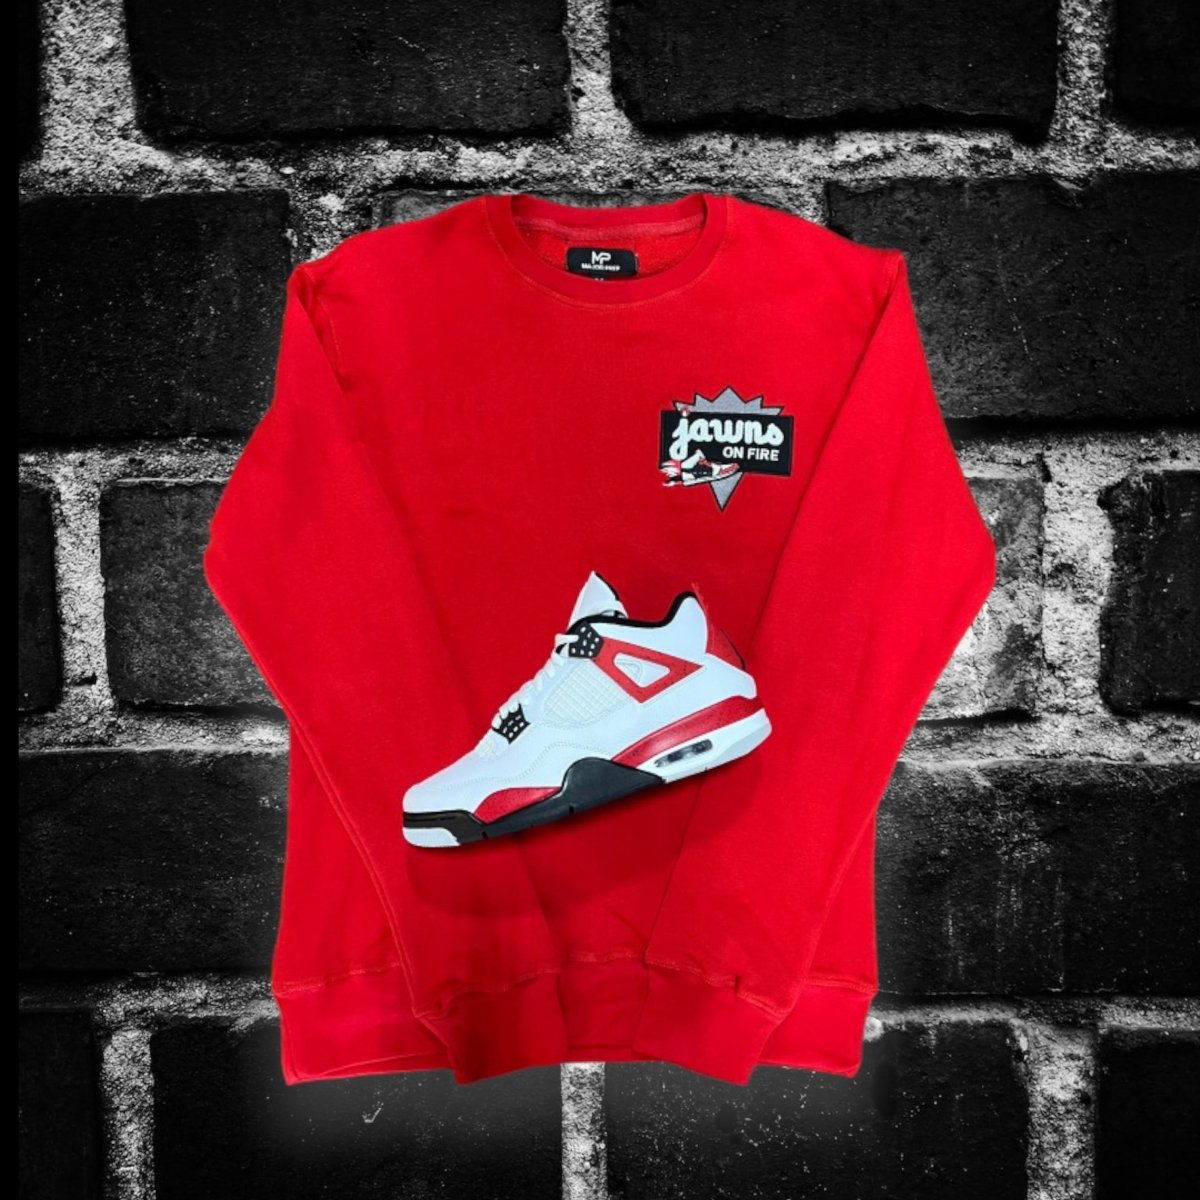 Jawns on Fire French Terry Crew by Major Prep Apparel - Red - Sweatshirt - Jawns on Fire - Jawns on Fire - sneakers